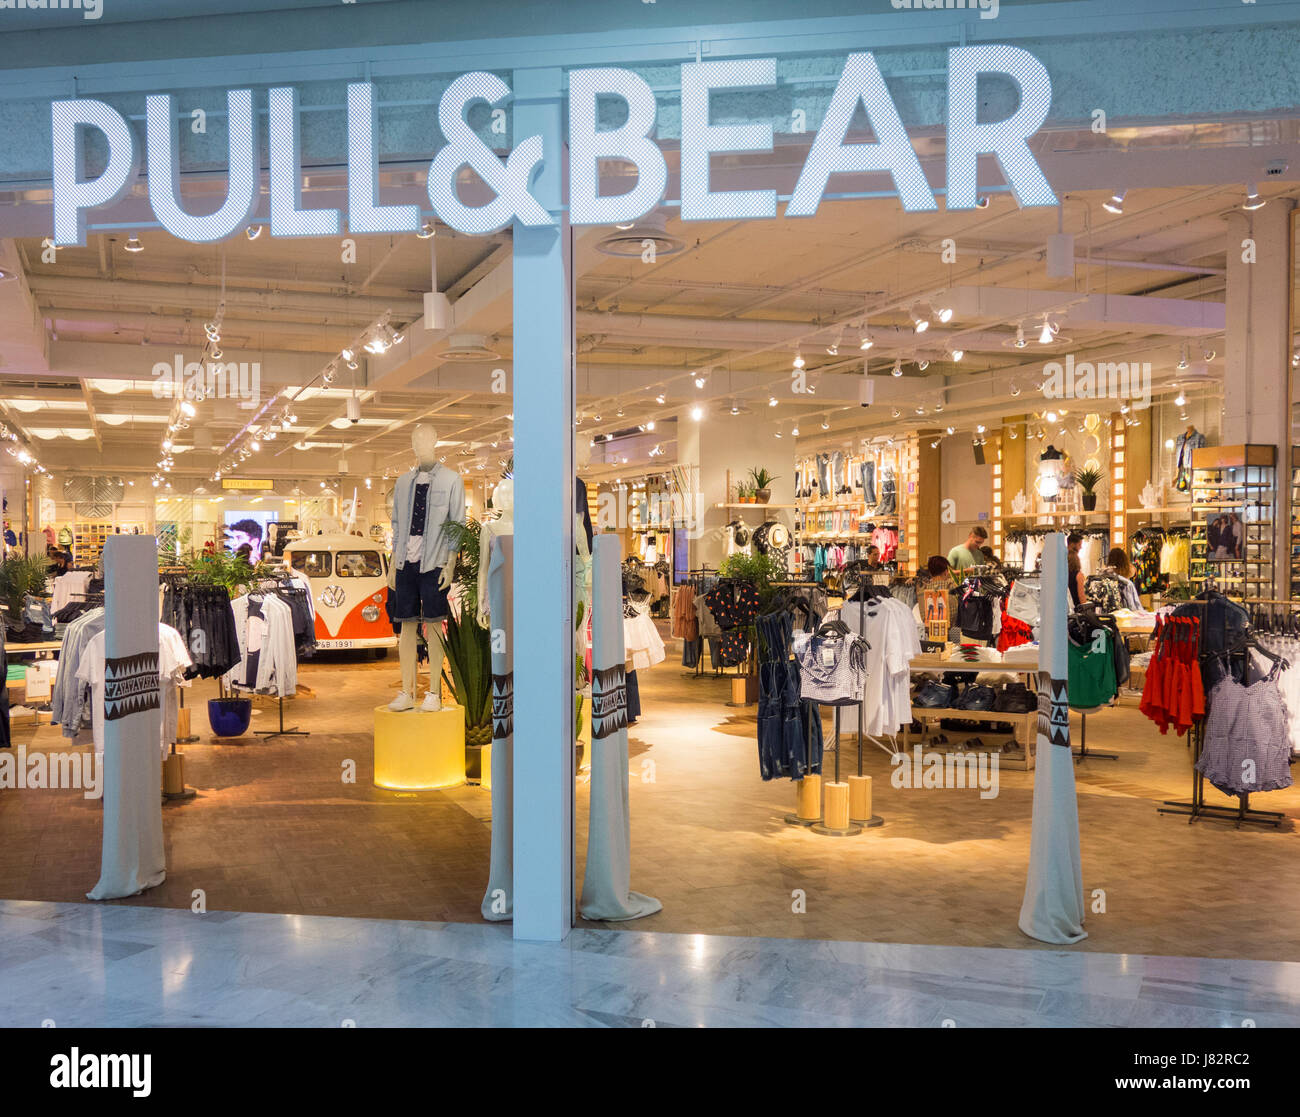 Pull & Bear clothing store in Spain Stock Photo - Alamy